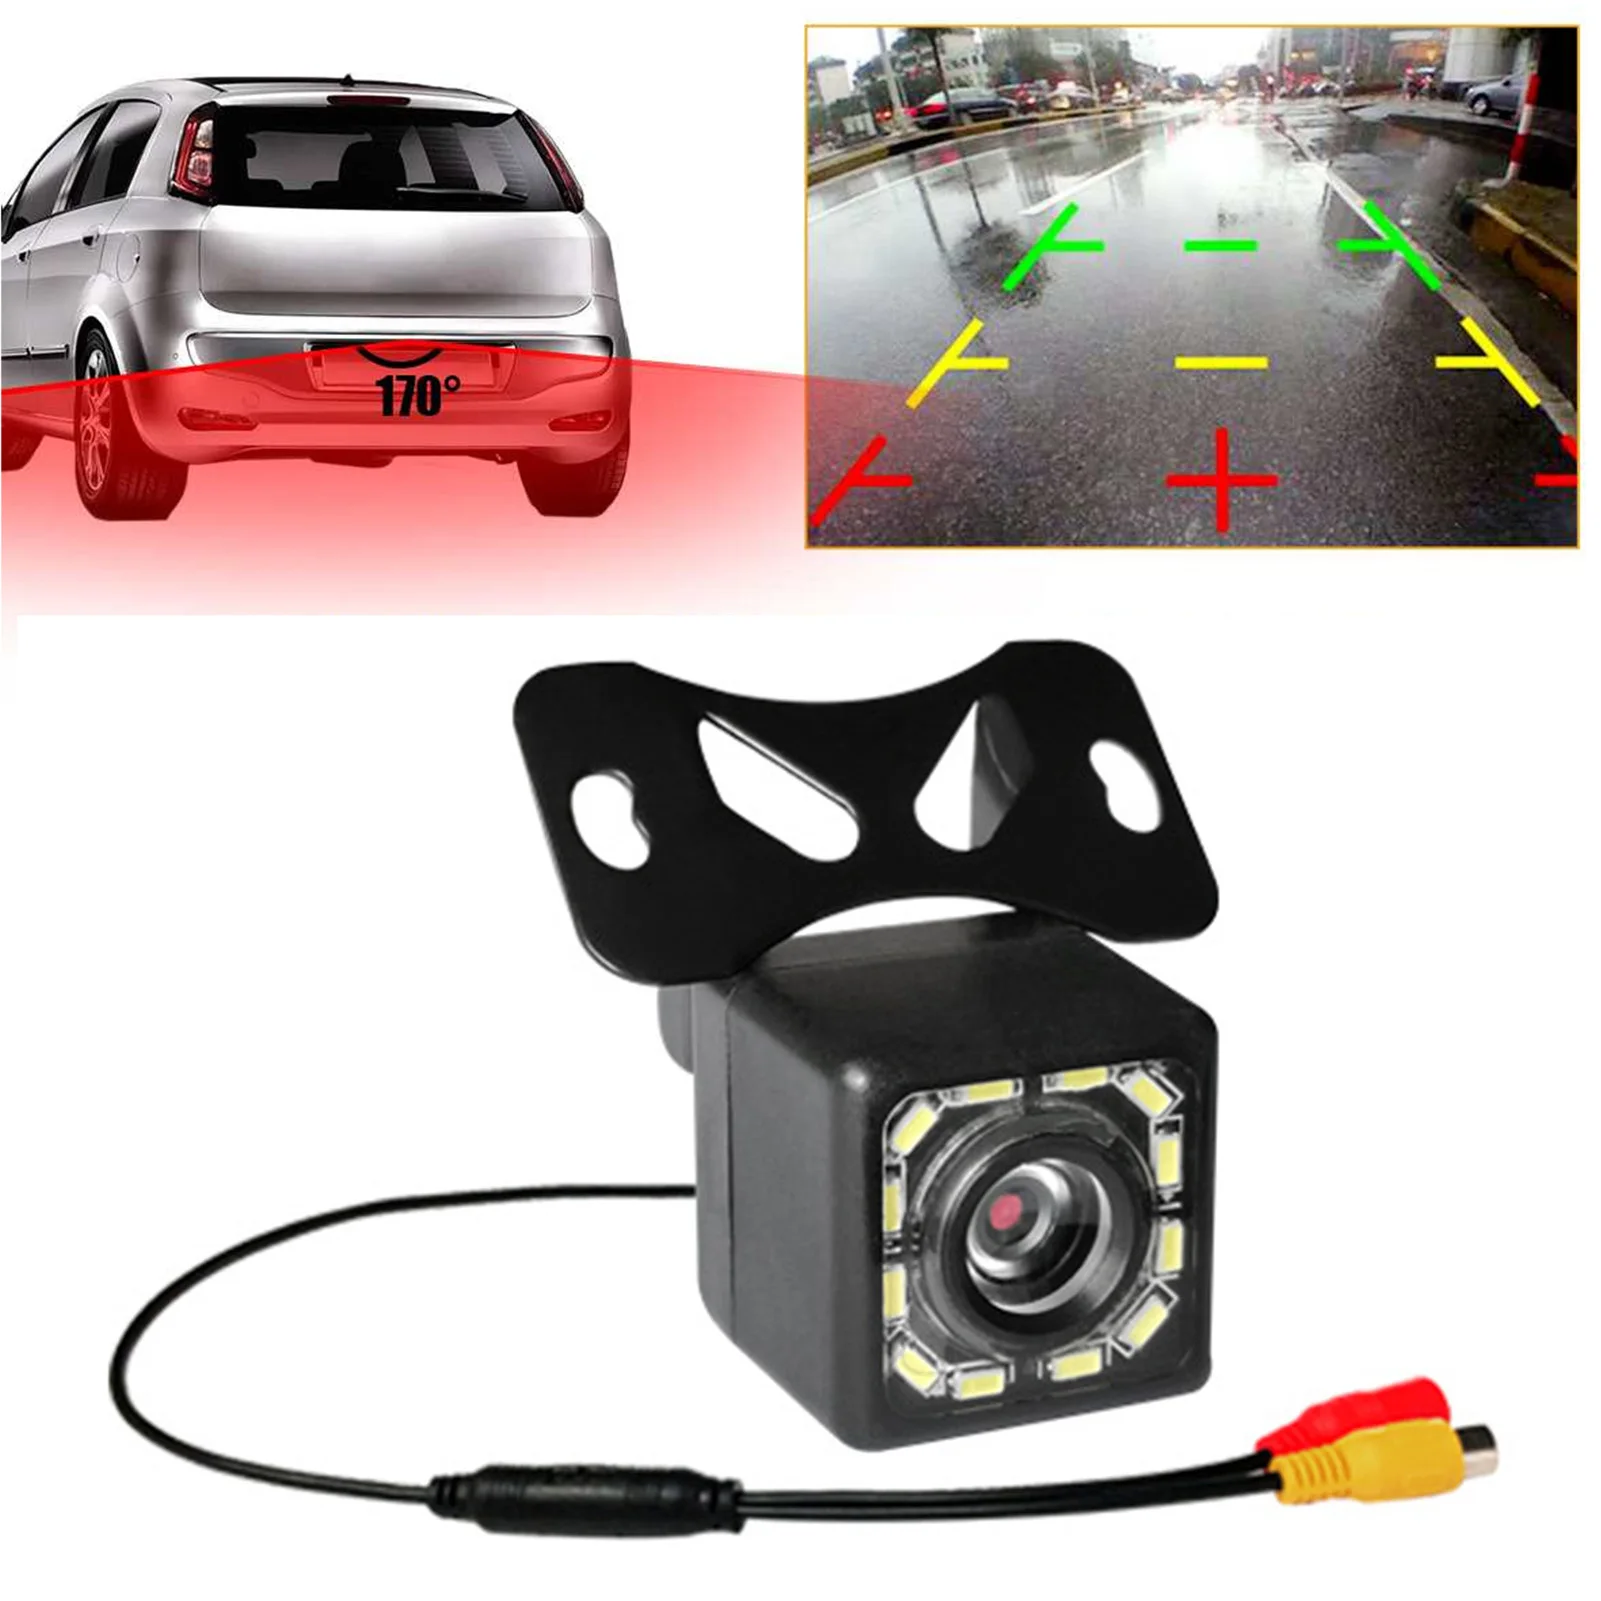 170° HD Camera Universal Fit For Car Front View Parking Assistance Reversing